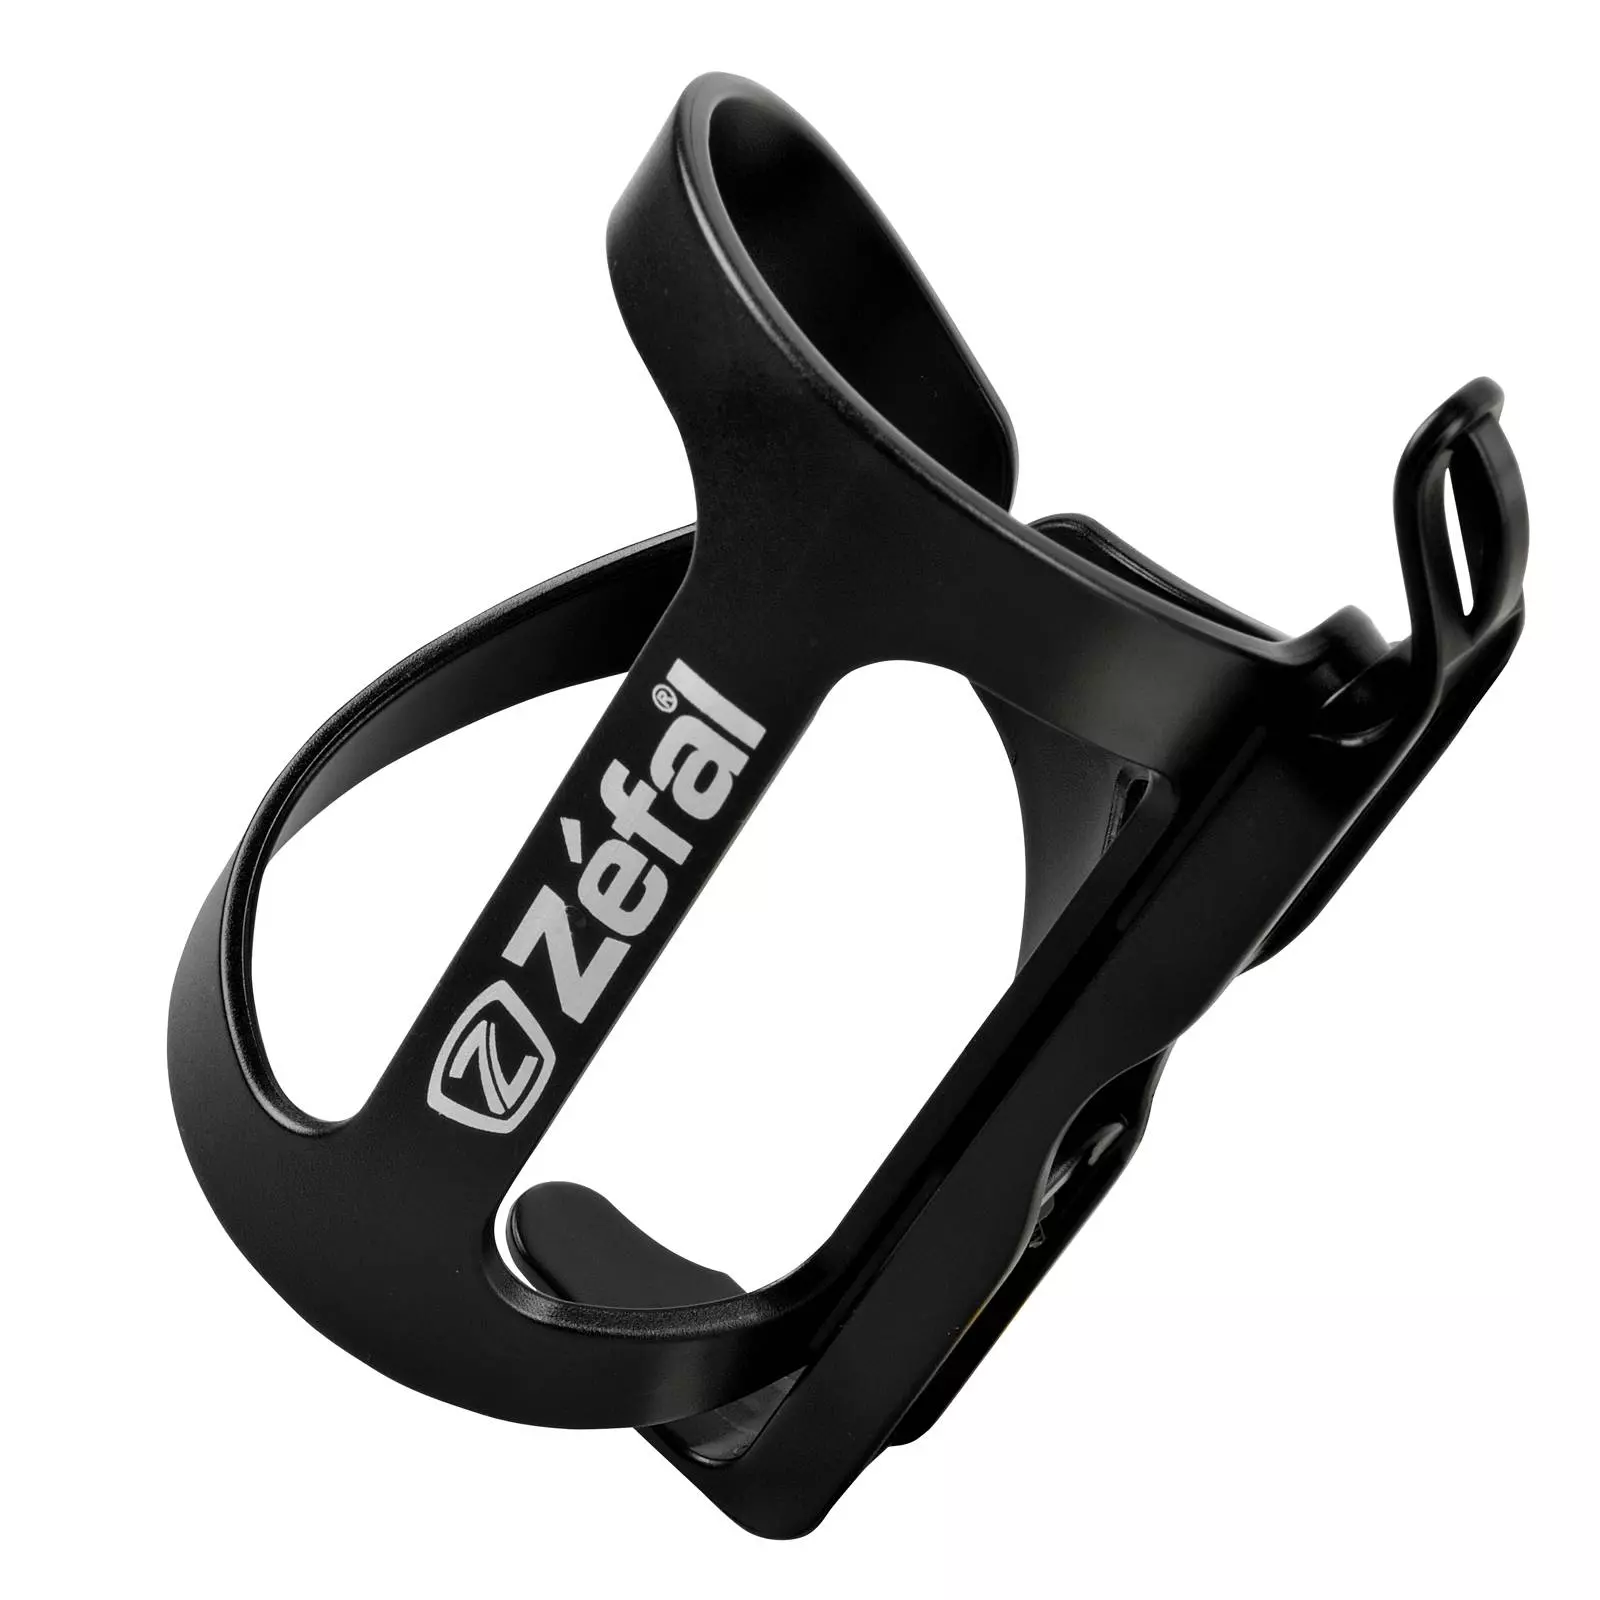 Zefal Wiiz Bicycle Bike Universal Fit Water Bottle Cage Holder Black And White 